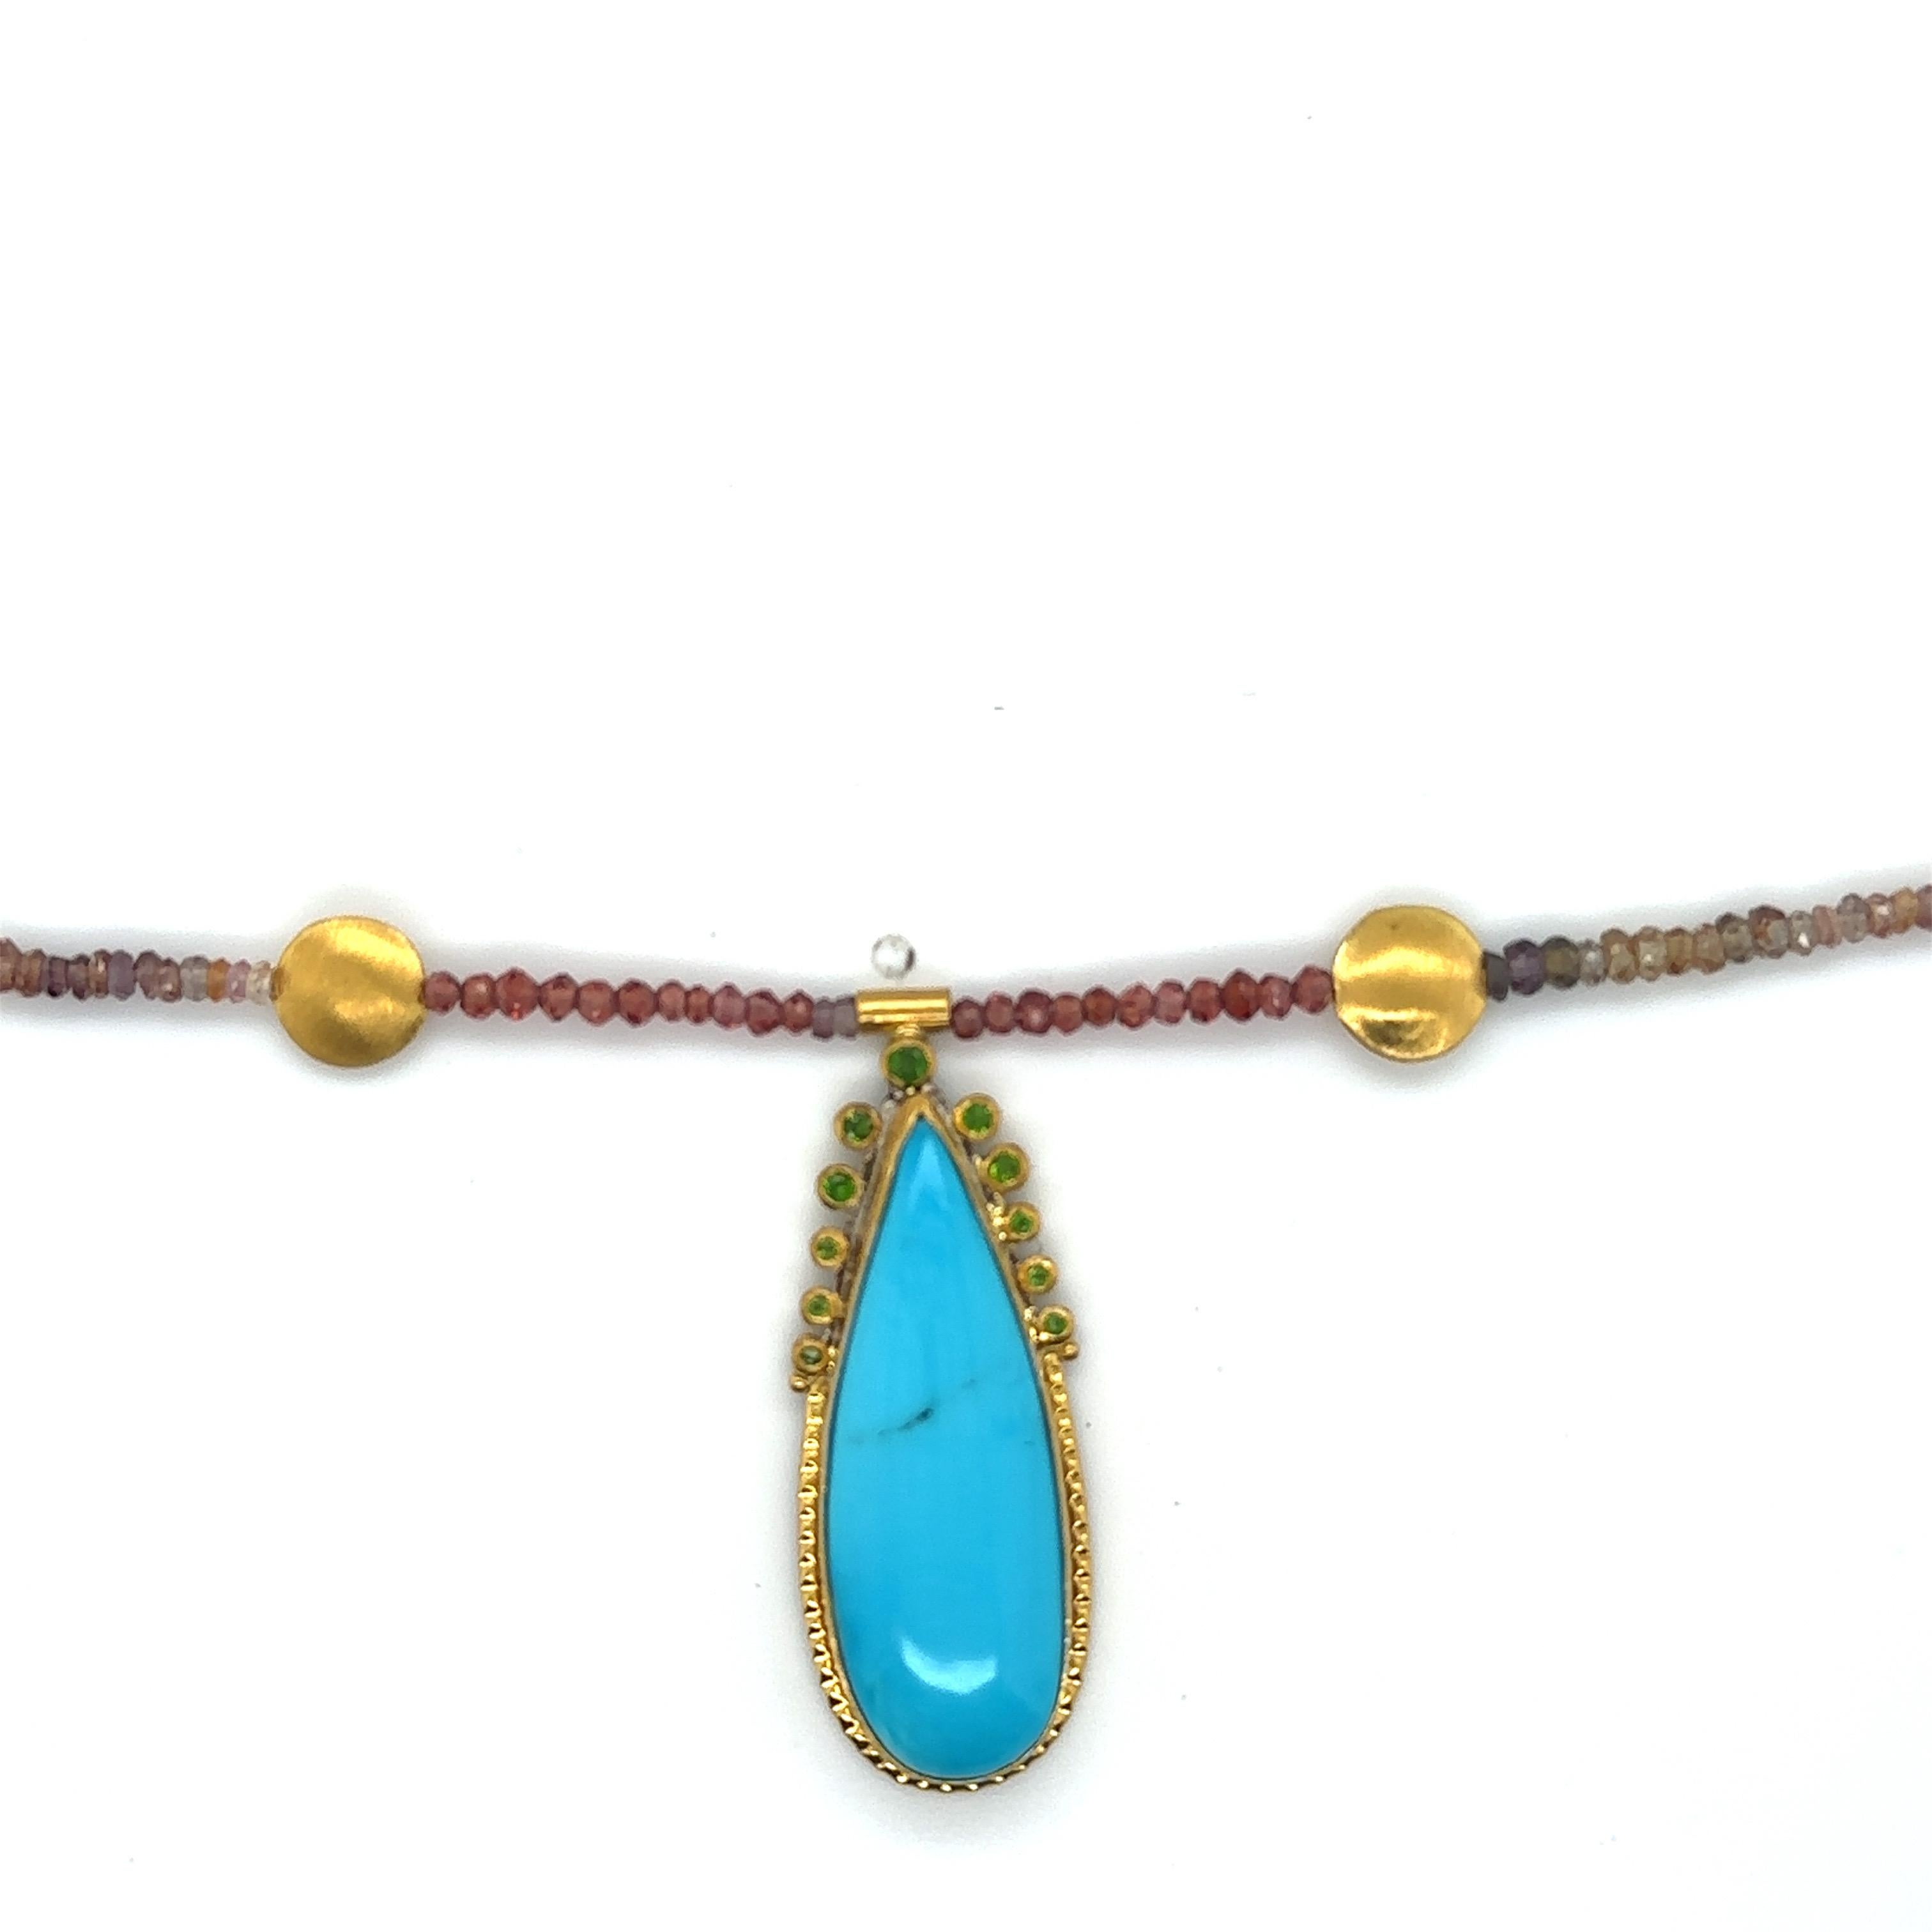 JAS-19-1845 - 24K GOLD/STERLING SILVER w KINGMAN TURQUOISE & MULTI COLOR BEADS In New Condition For Sale In New York, NY